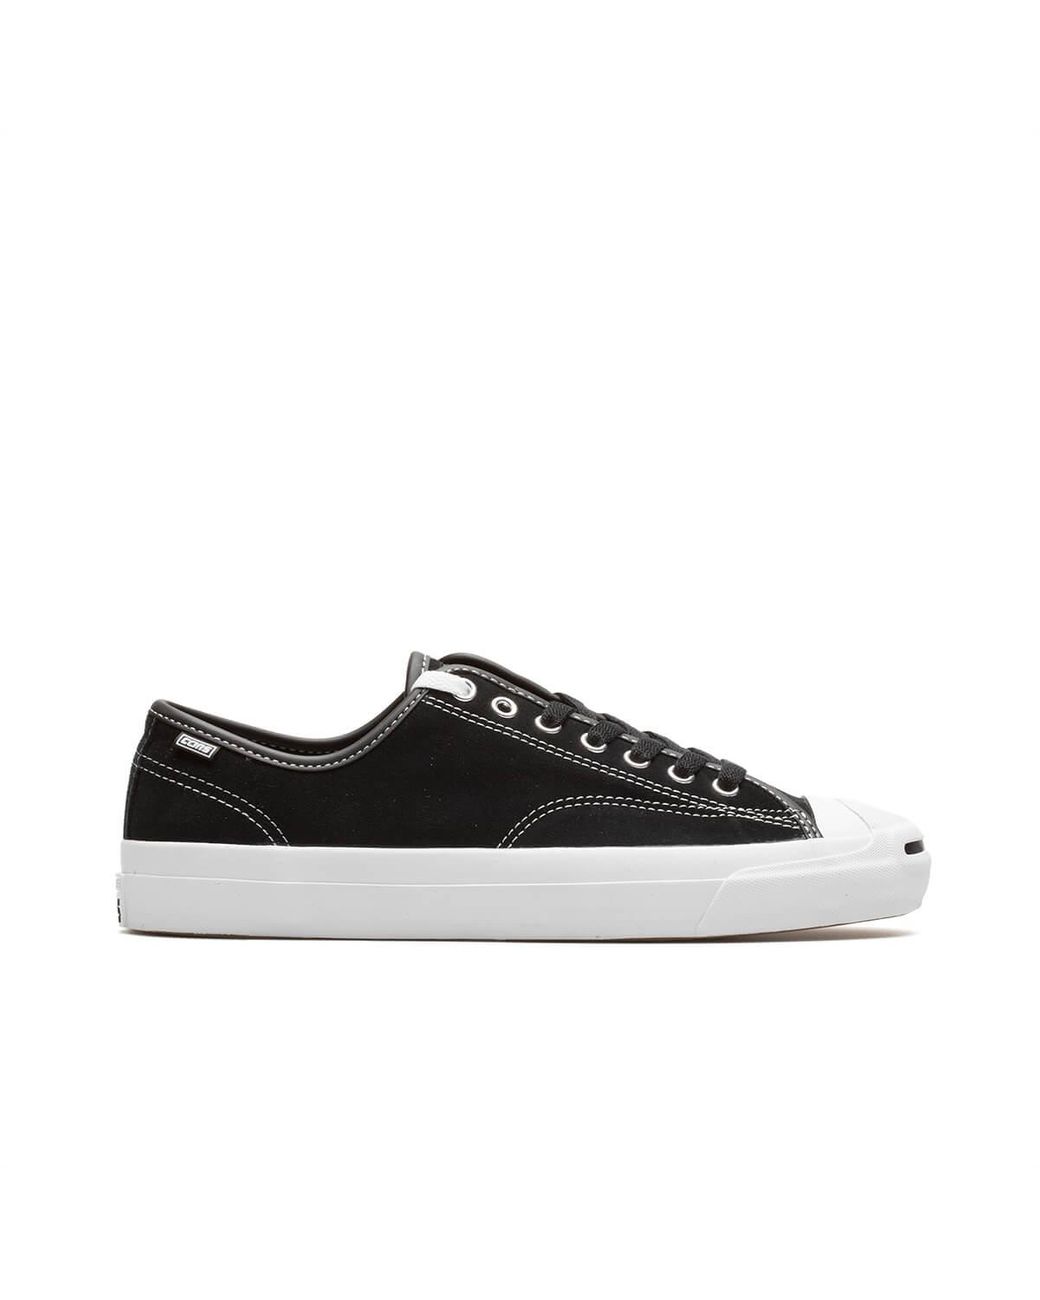 Converse Suede Jack Purcell Pro in Black for Men - Lyst